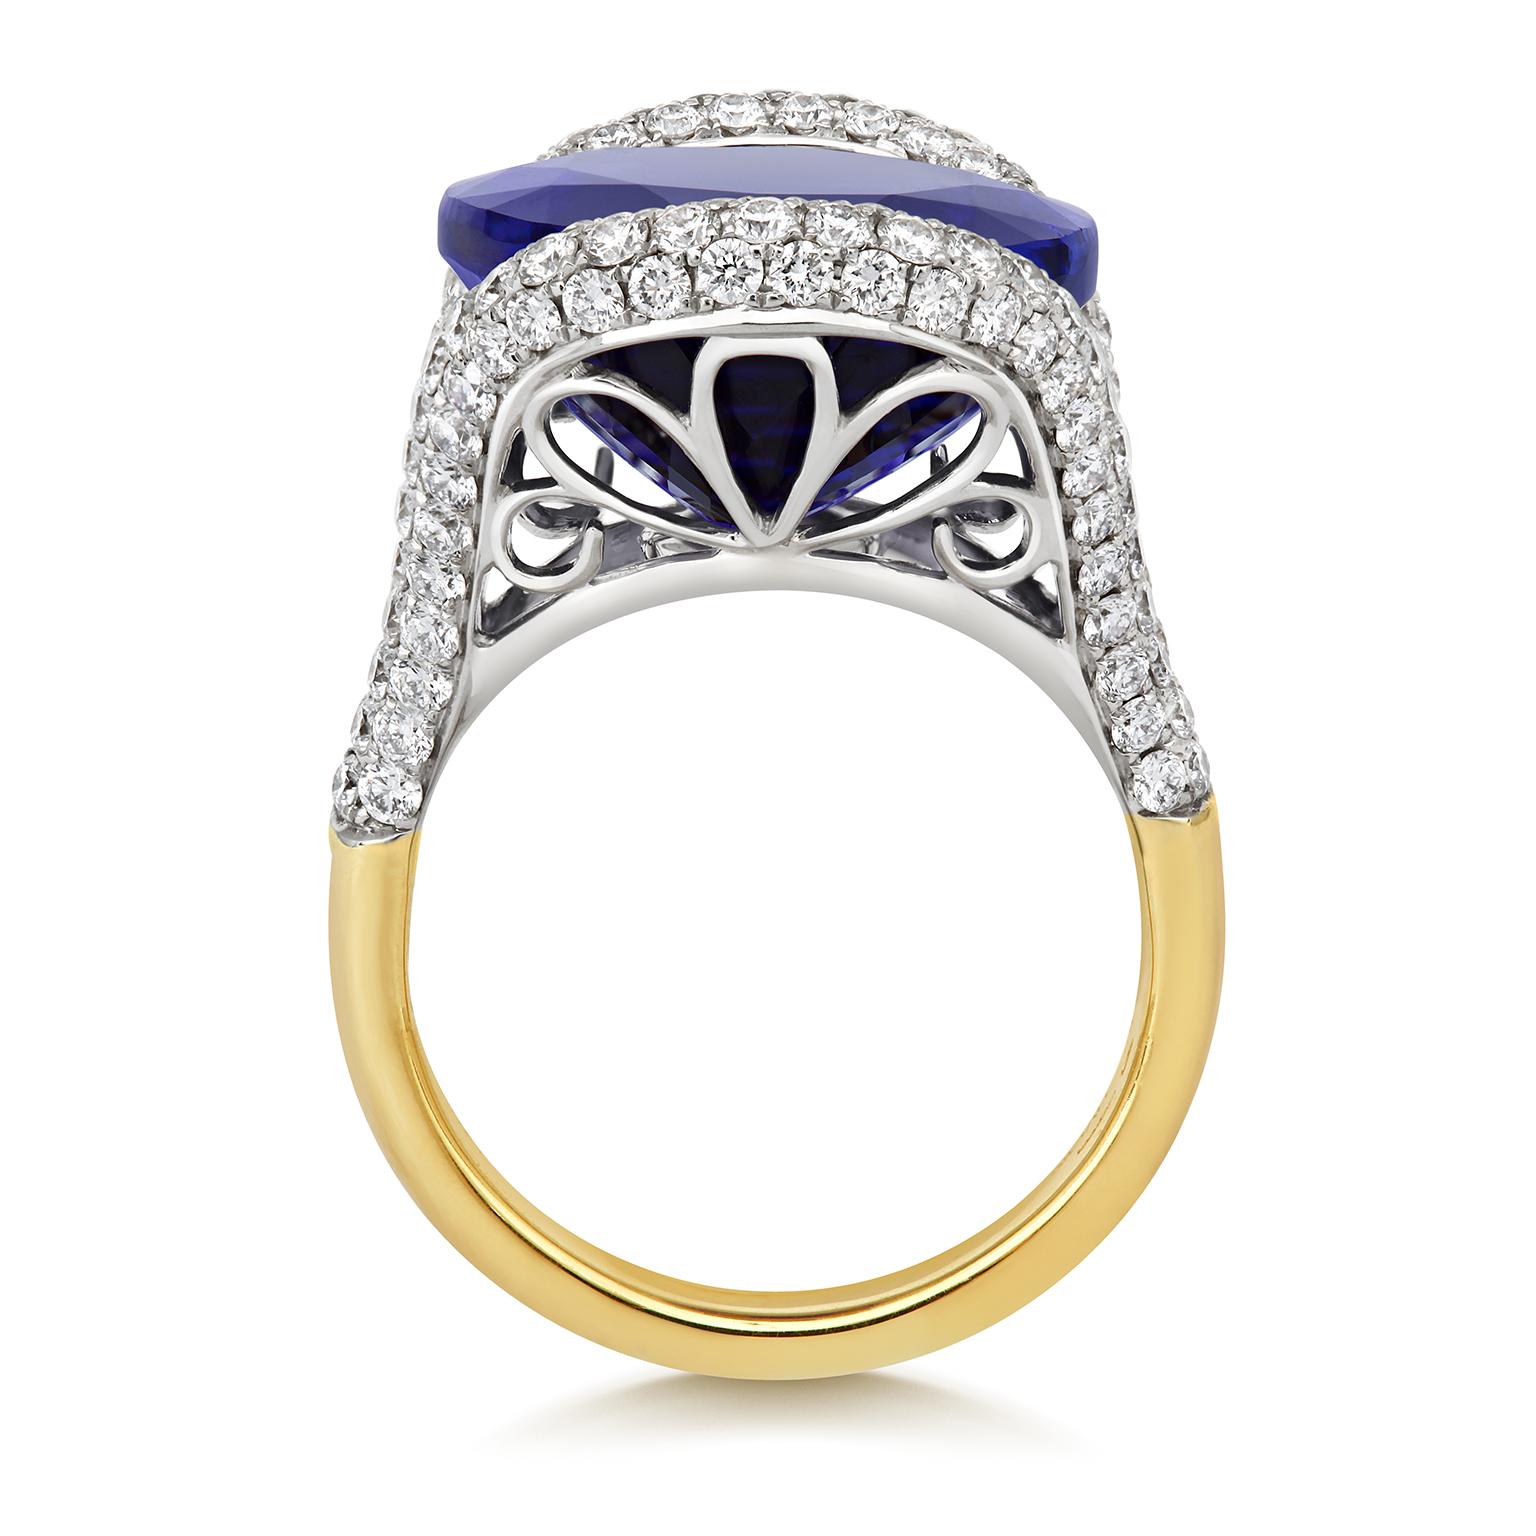 'THE BLUE TULIP' - This stunning gala cocktail ring has been crafted in 18ct white & yellow gold and set with 2.25ct of glittering fine white diamonds and a mesmerising AAAA+ 20.67ct royal violet-blue oval Tanzanite gemstone. Inspired by the tulips